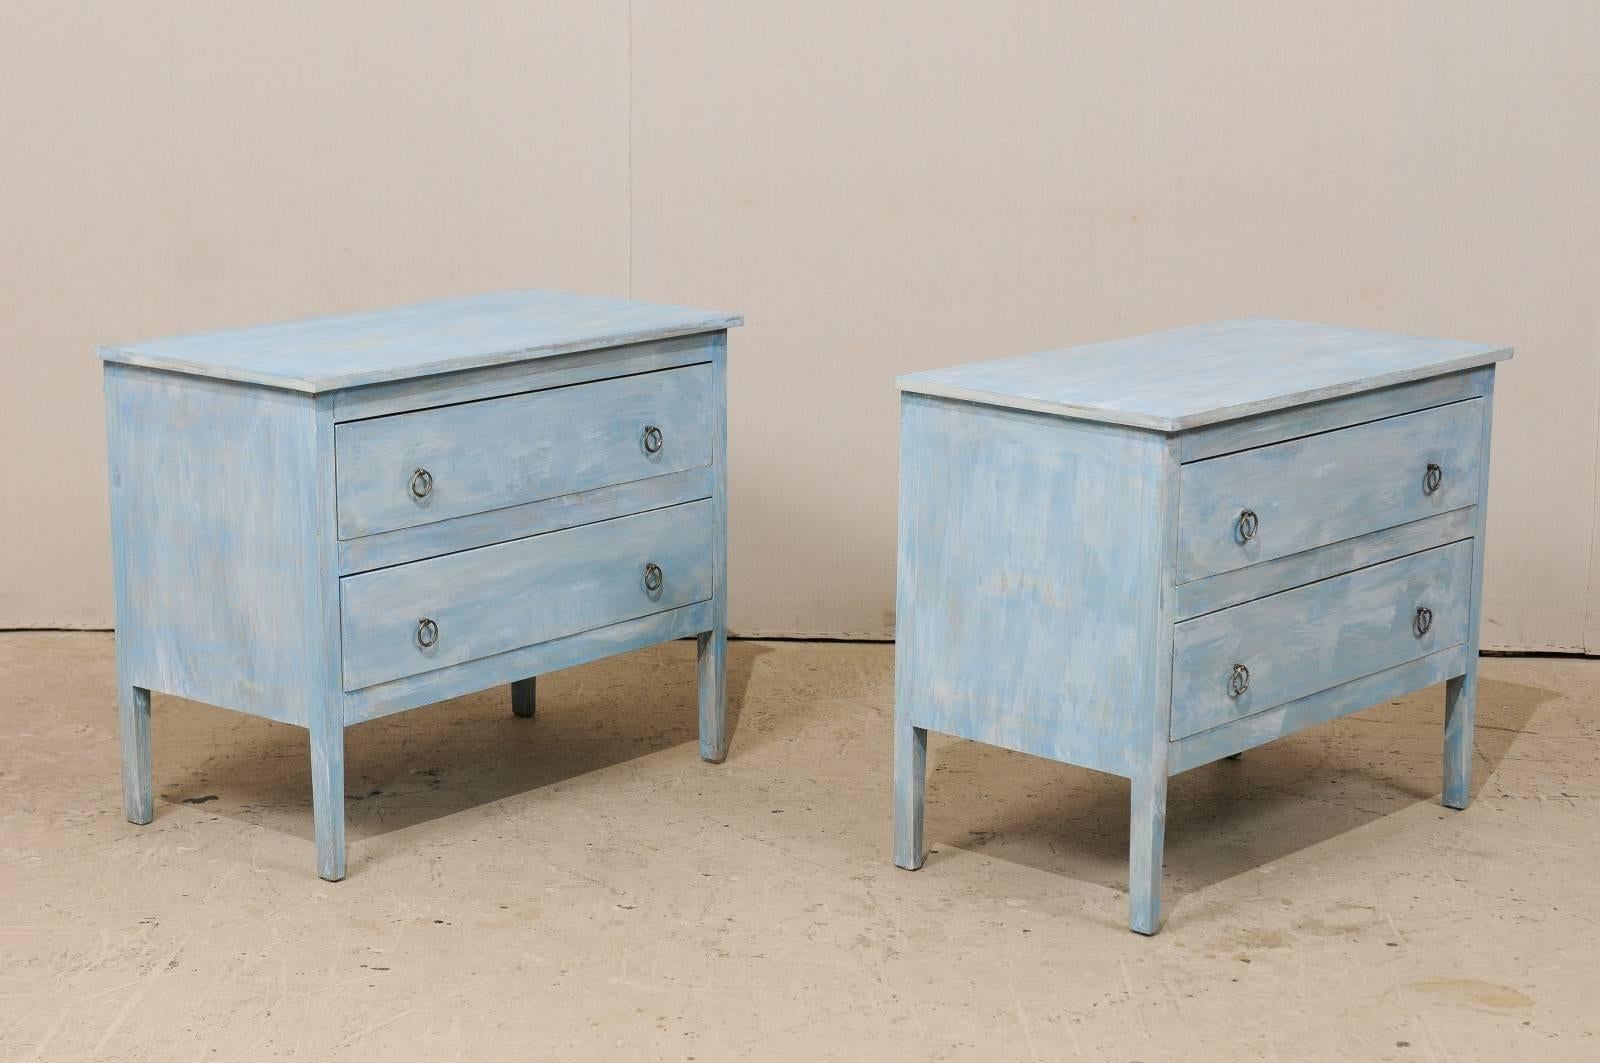 American Pair of Painted Wood Two-Drawer Chests in Grey, Light Blue and White Color